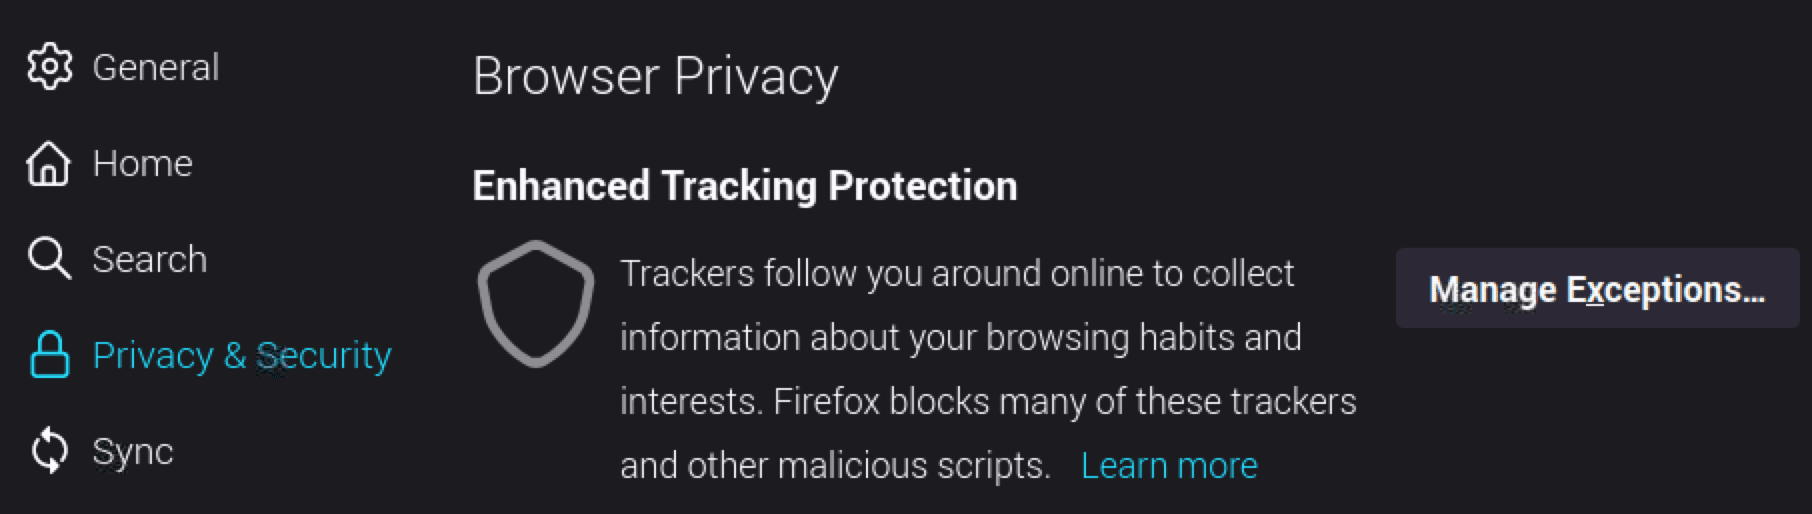 browser privacy